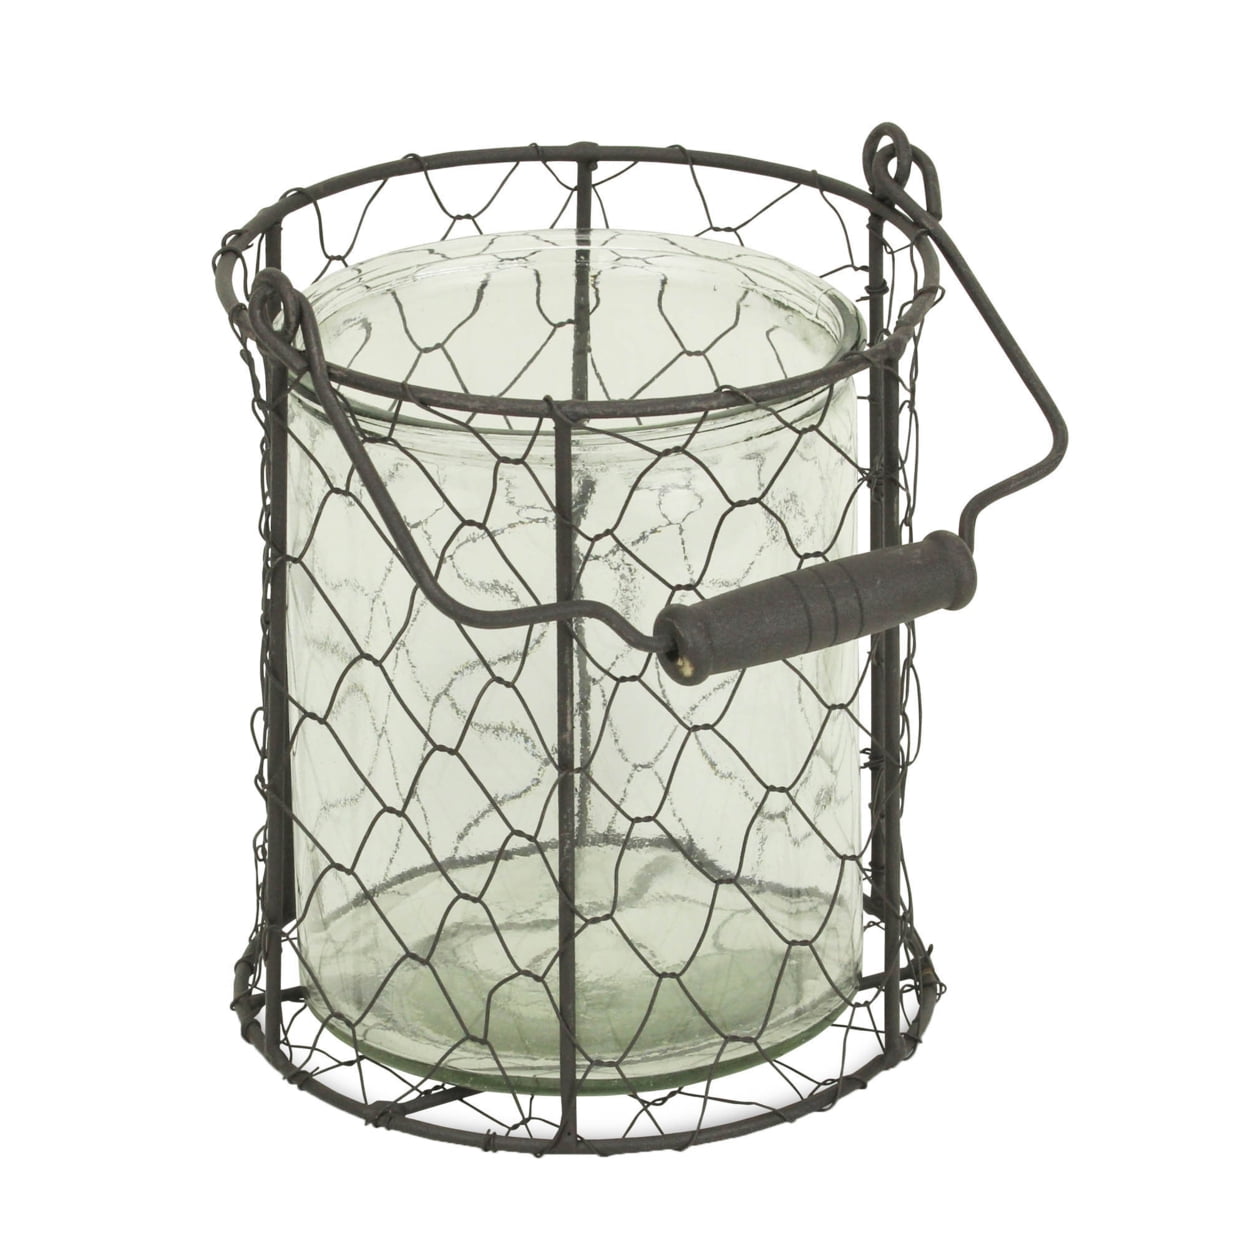 15s001brxl Round Glass Jar In Wire Basket, Brown - Extra Large